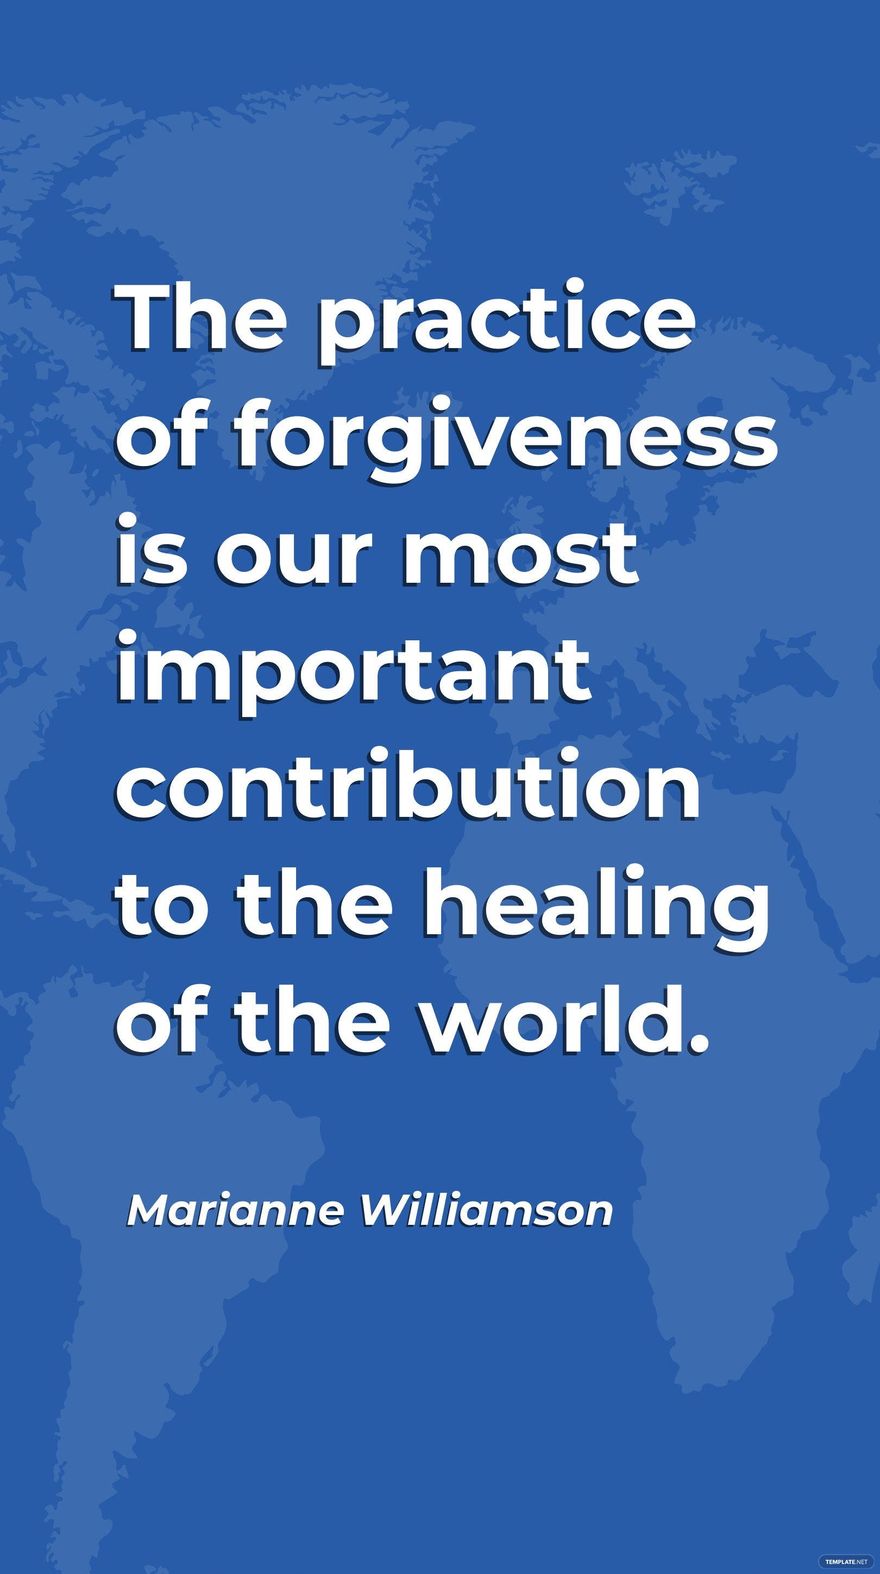 Marianne Williamson - The practice of forgiveness is our most important contribution to the healing of the world.